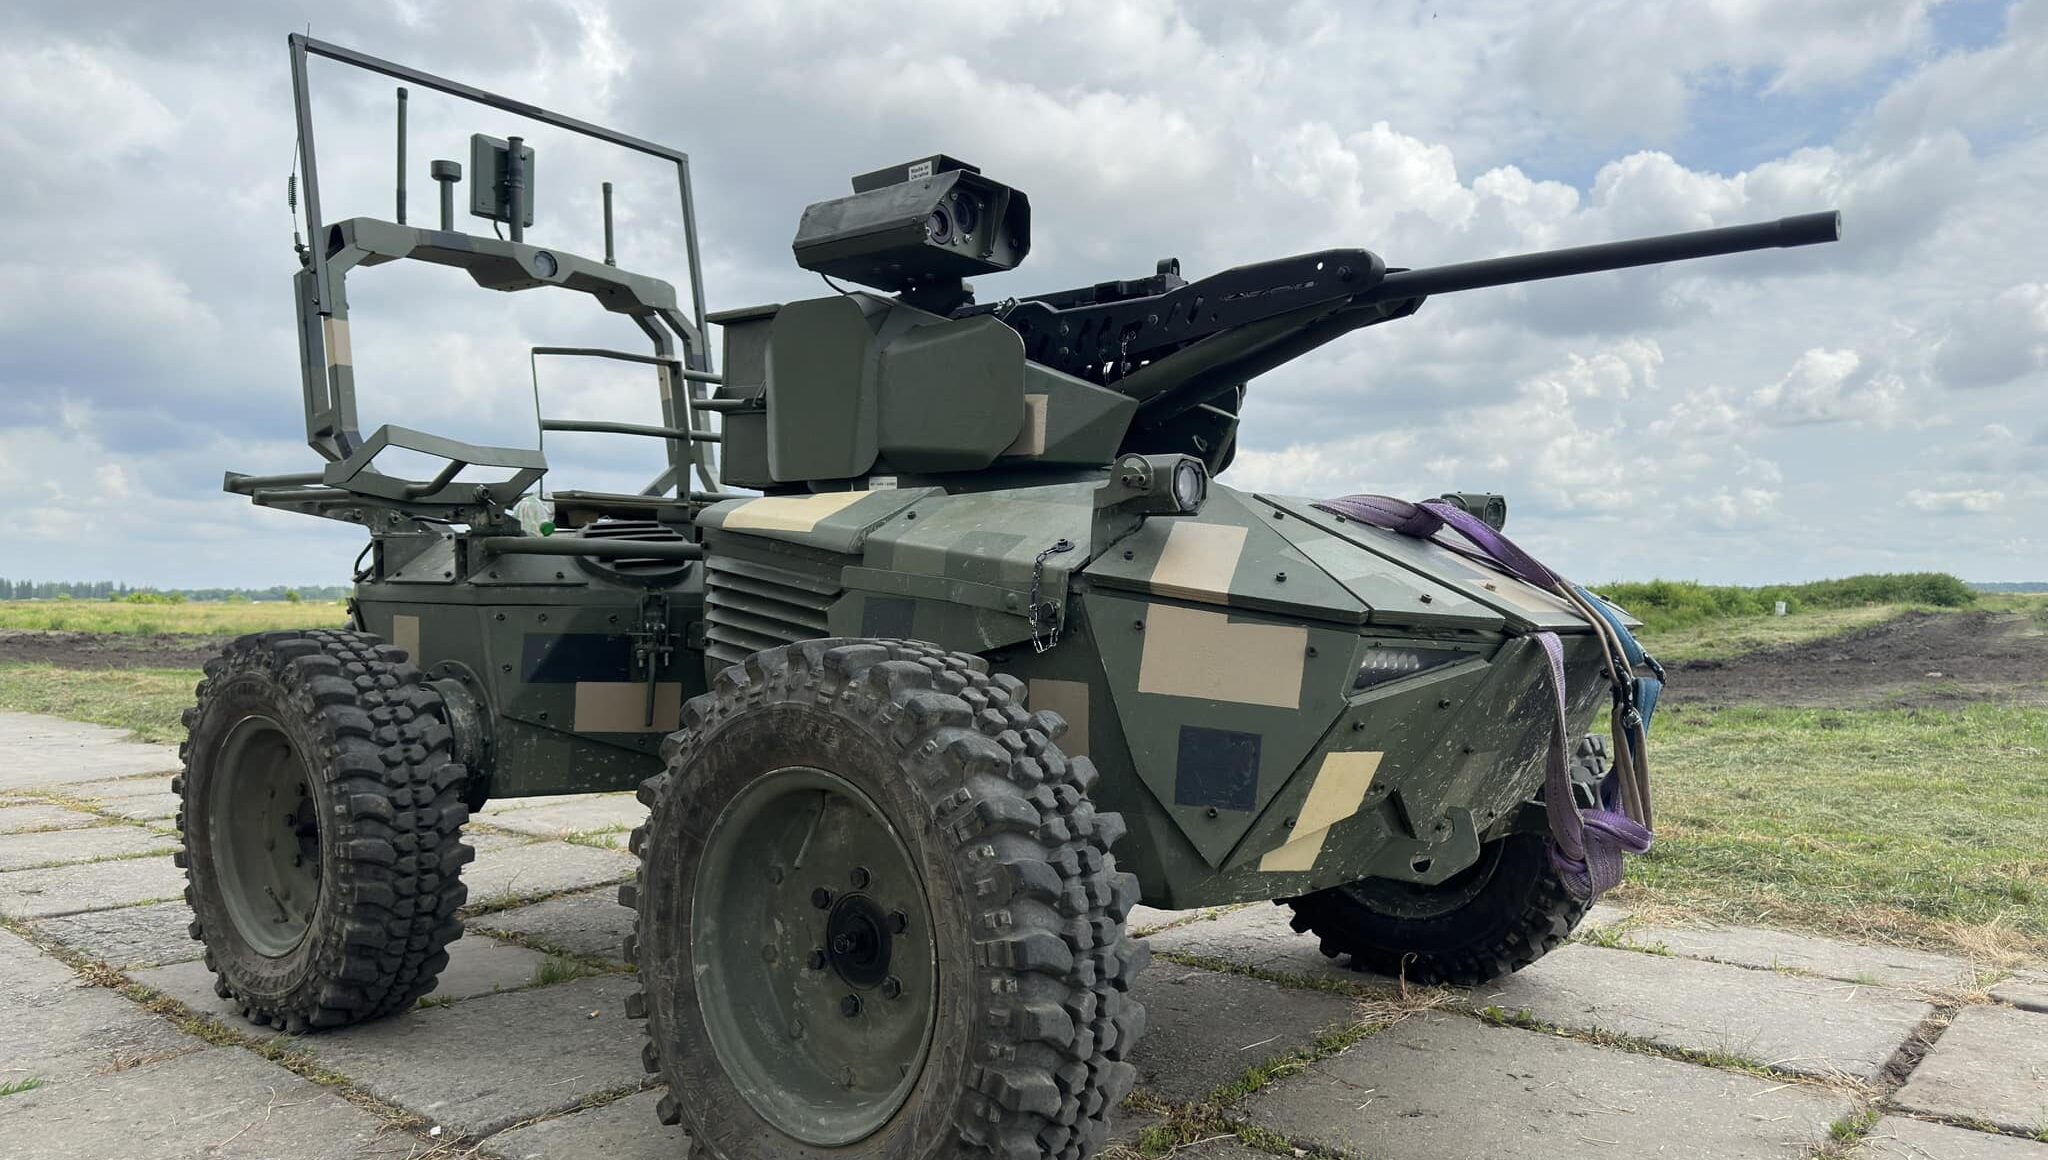 Ukraine’s new unmanned robot tested on front line